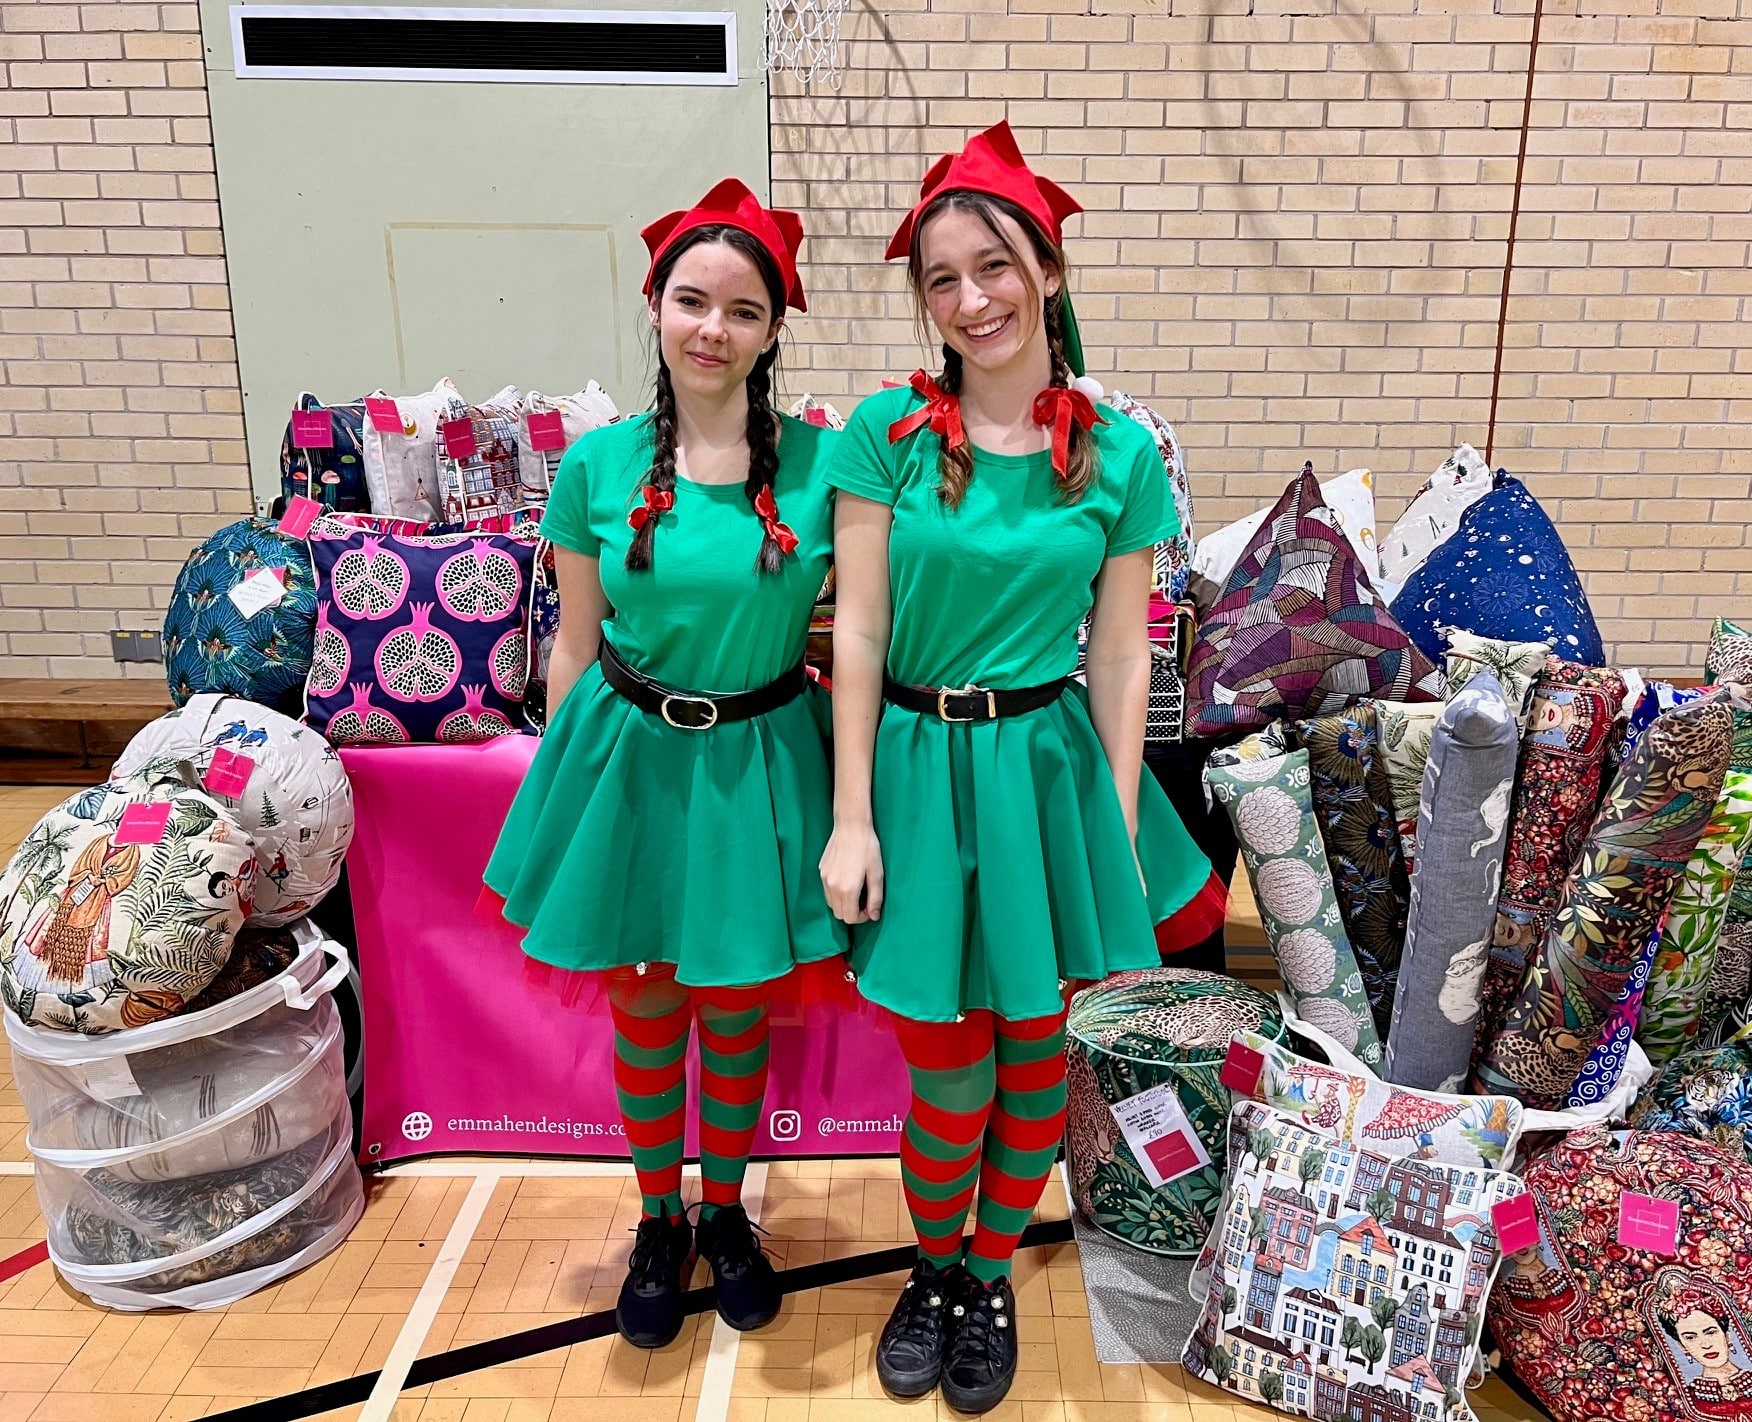 Two girls dressed as elves